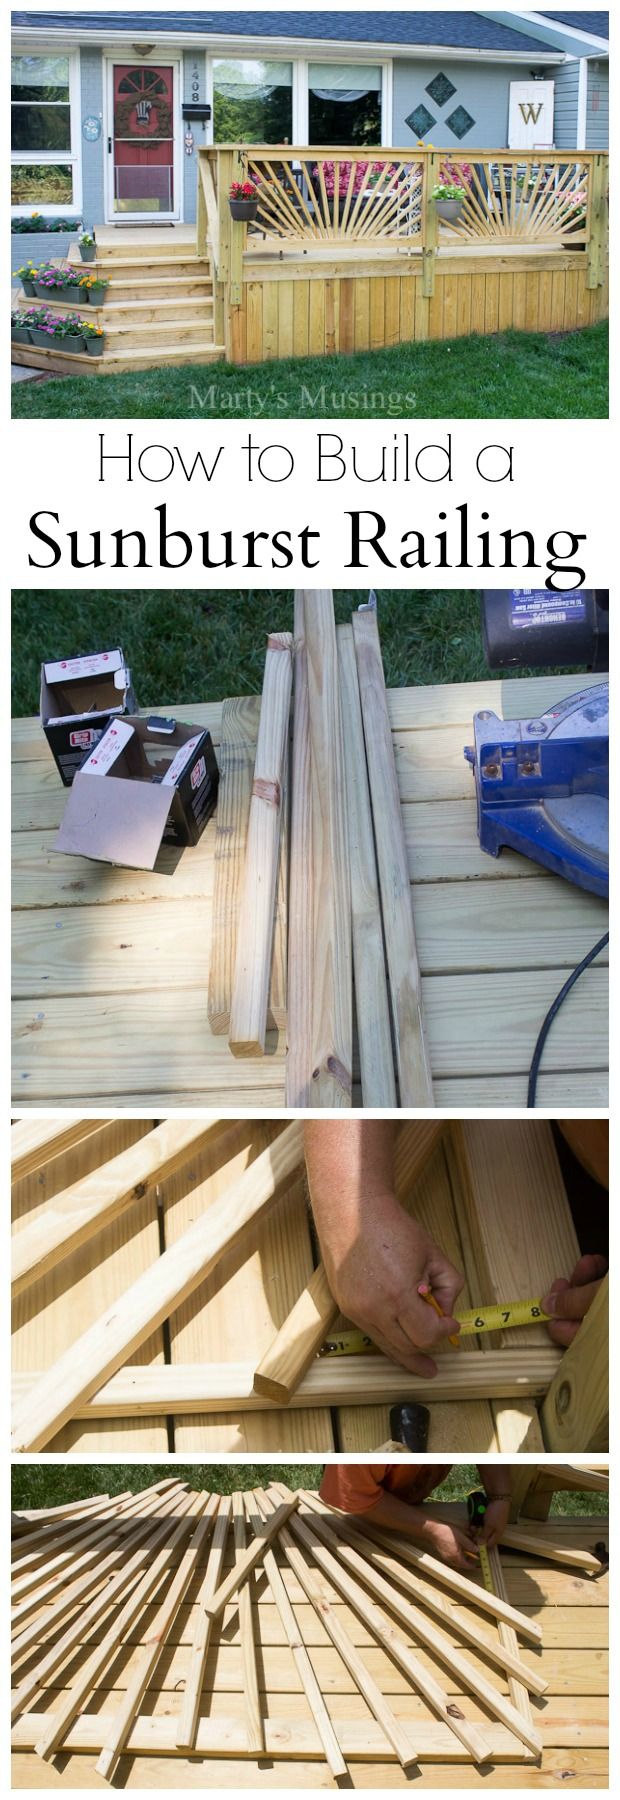 How to Build a Sunburst Railing - Marty's Musings